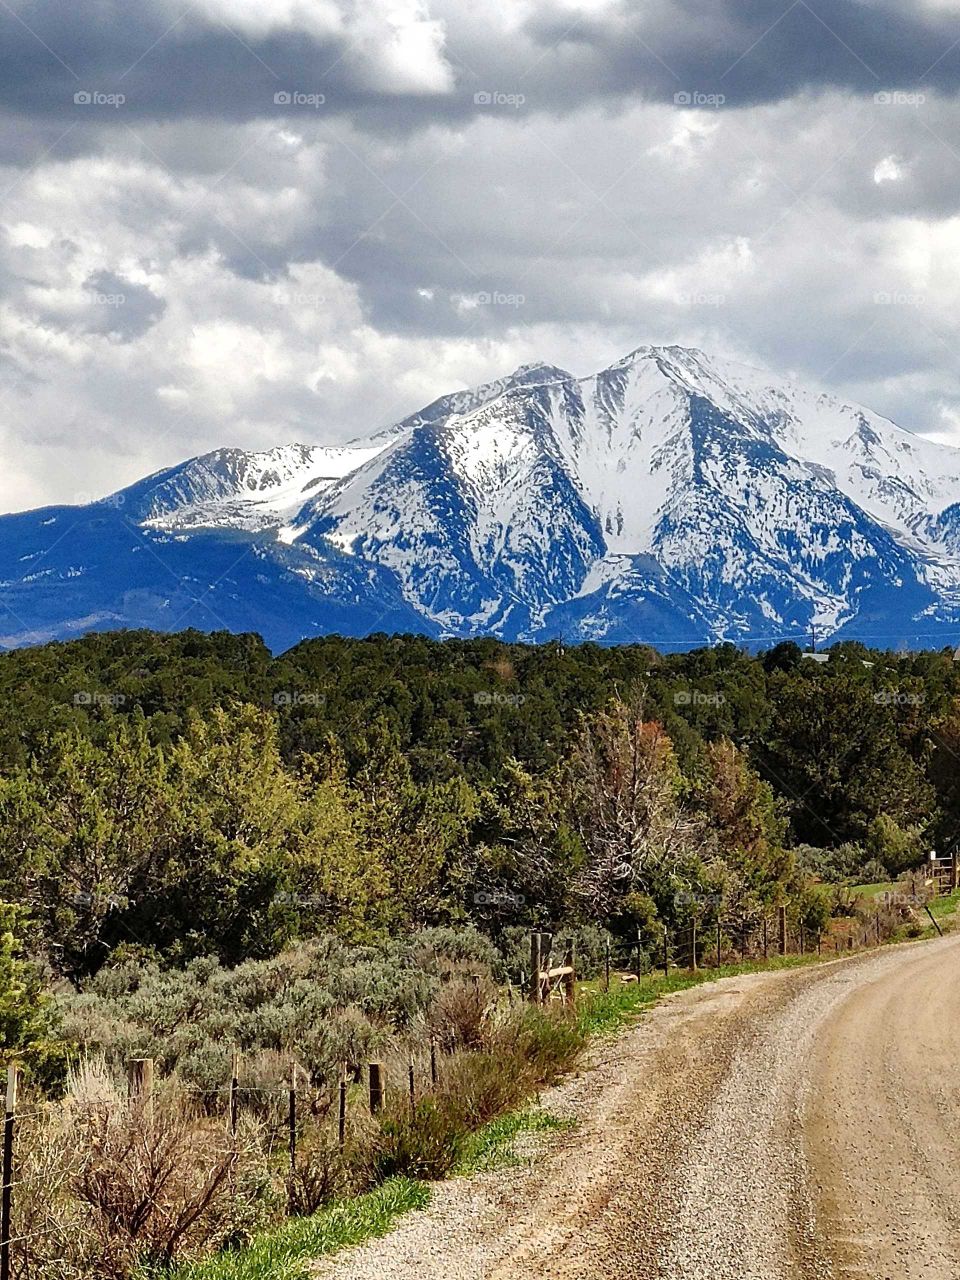 Serene beauty. A country road lays beneath the majestic peaks of Mt. Sopris,